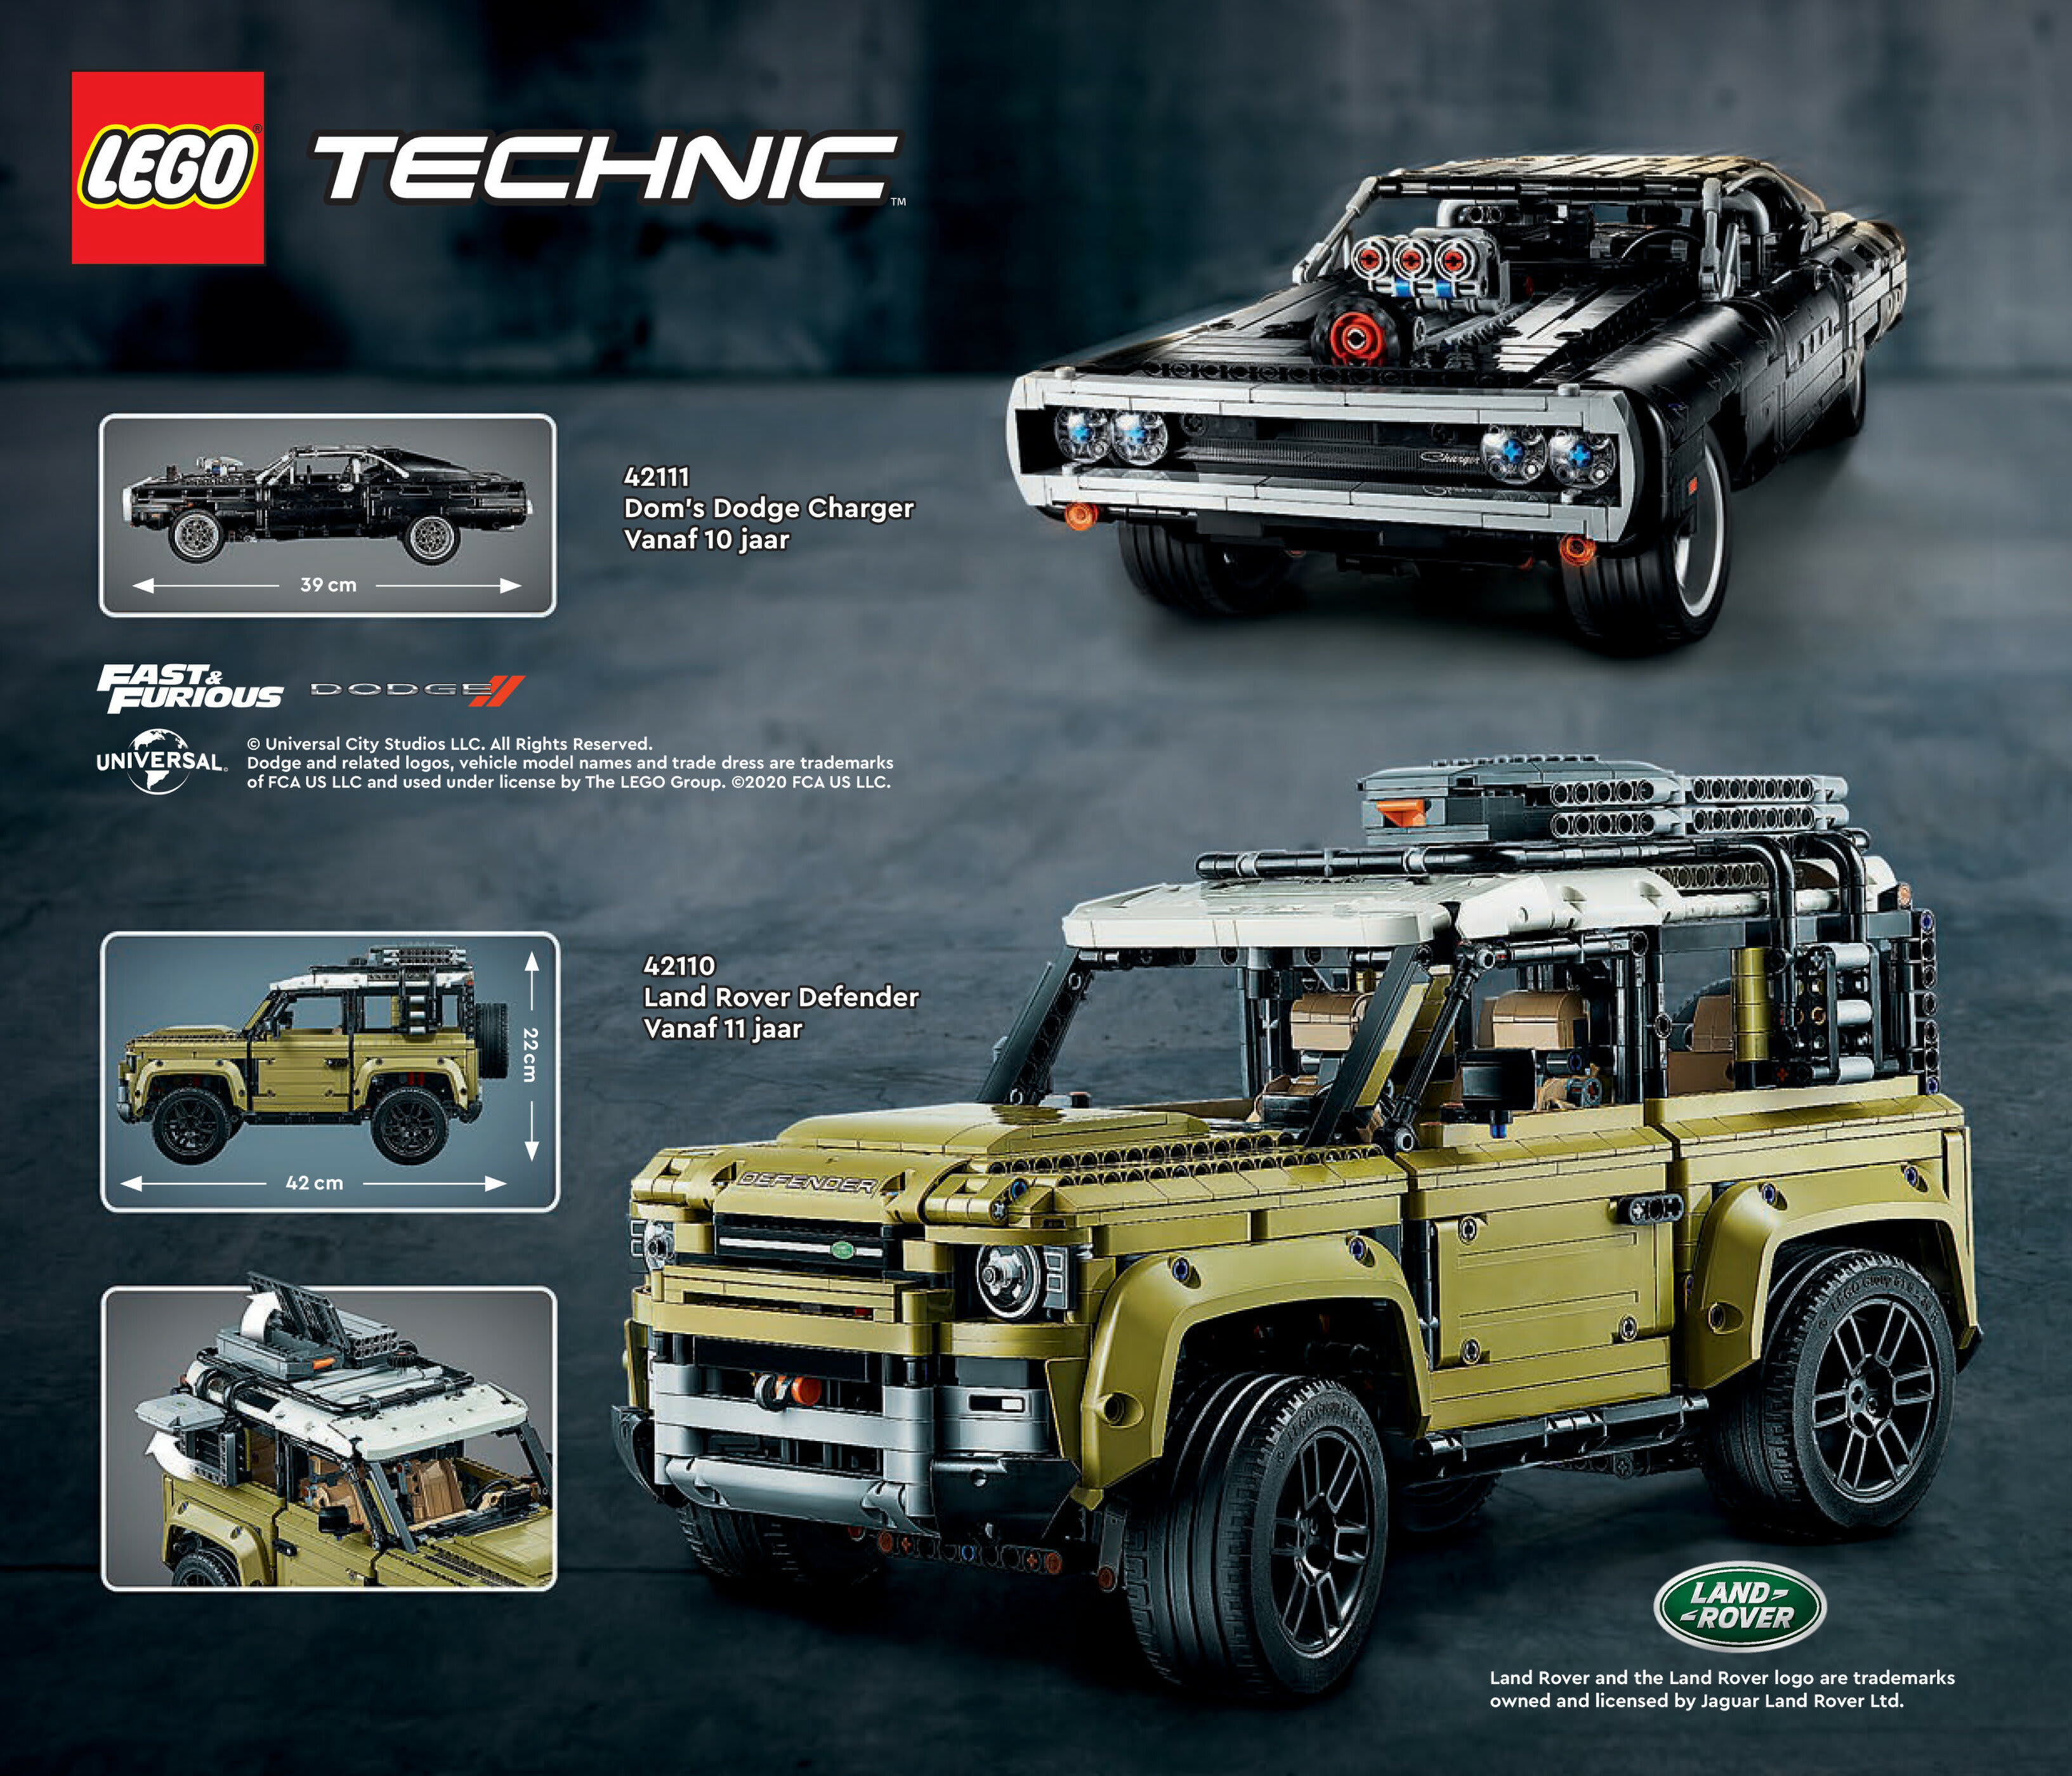 technic, pharger, dom's, dodge, charger, fast&, furious, universal, studios, rights, reserved, related, logos, vehicle, model, names, trade, dress, trademarks, under, license, group, ©2020, oioiio1o, rover, defender, owned, licensed, jaguar